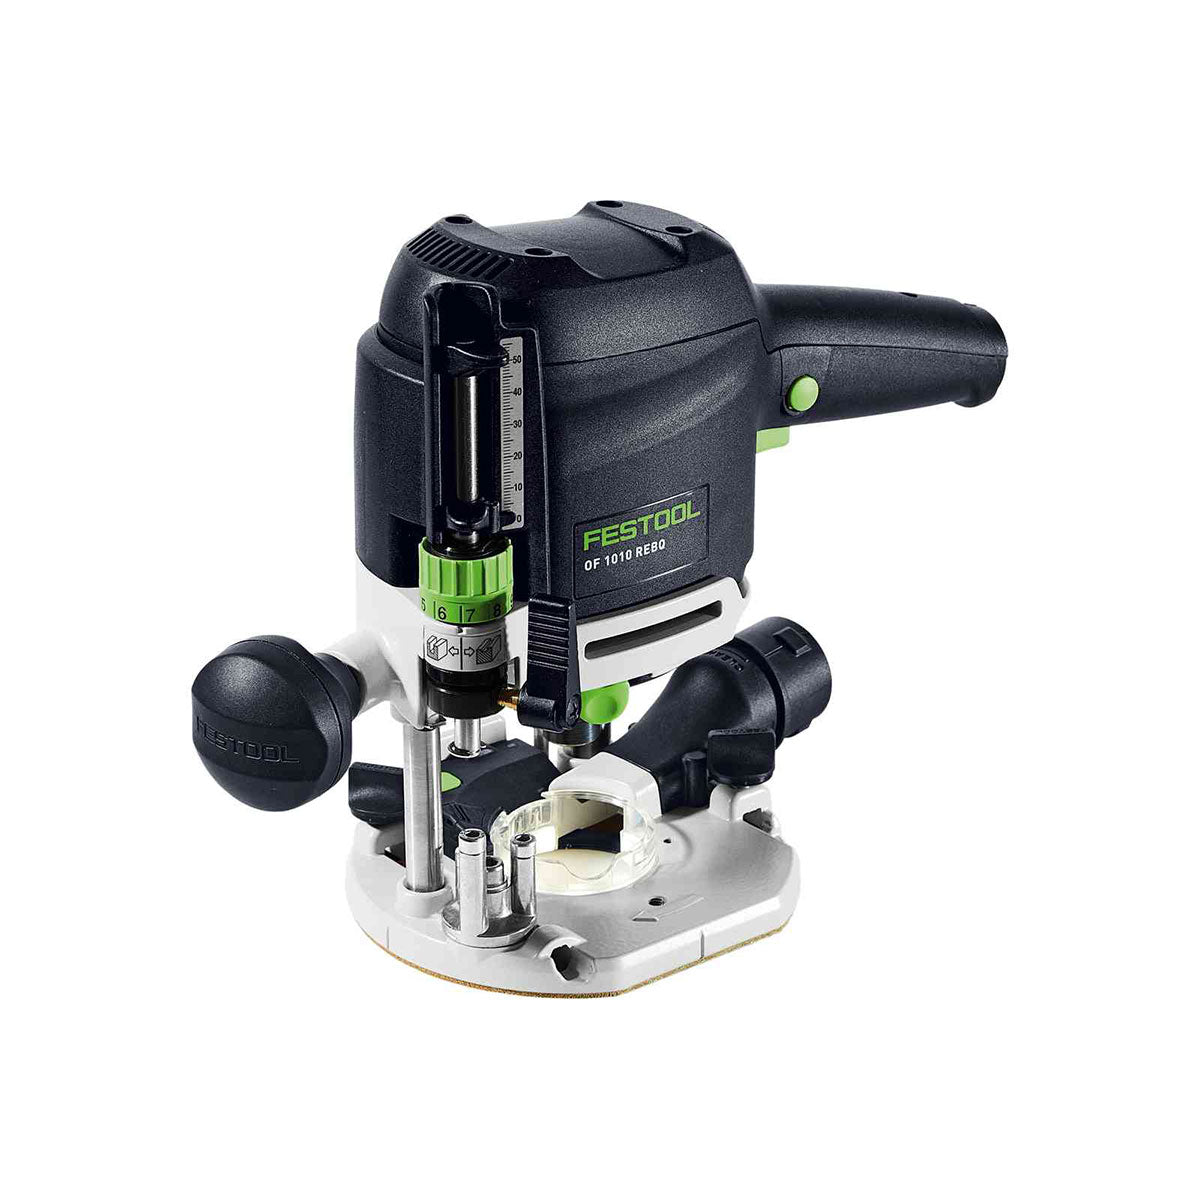 Festool OF 1010 REBQ-Plus 230V GB Router Cutter - 578004 With ZS-OF 1010 M Router Accessories Set